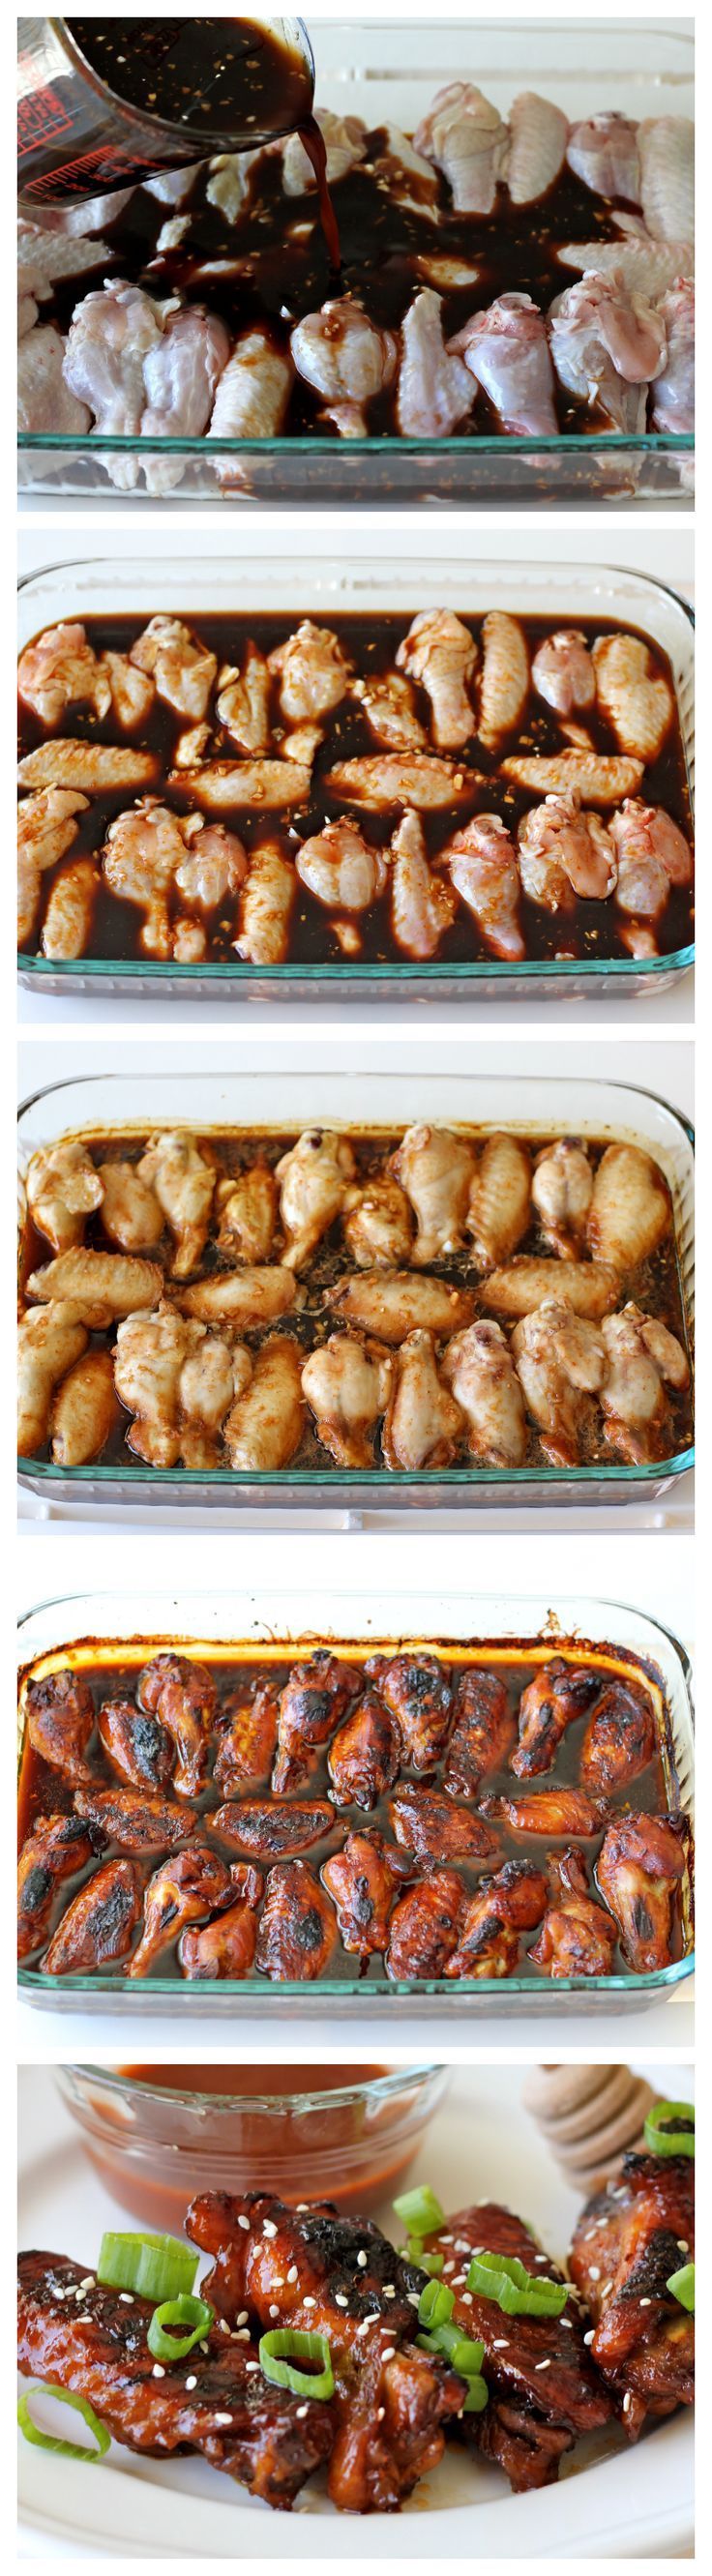 Honey Teriyaki Hot Wings – Sweet and spicy wings baked to crisp perfection. Doesn’t get easier than that!